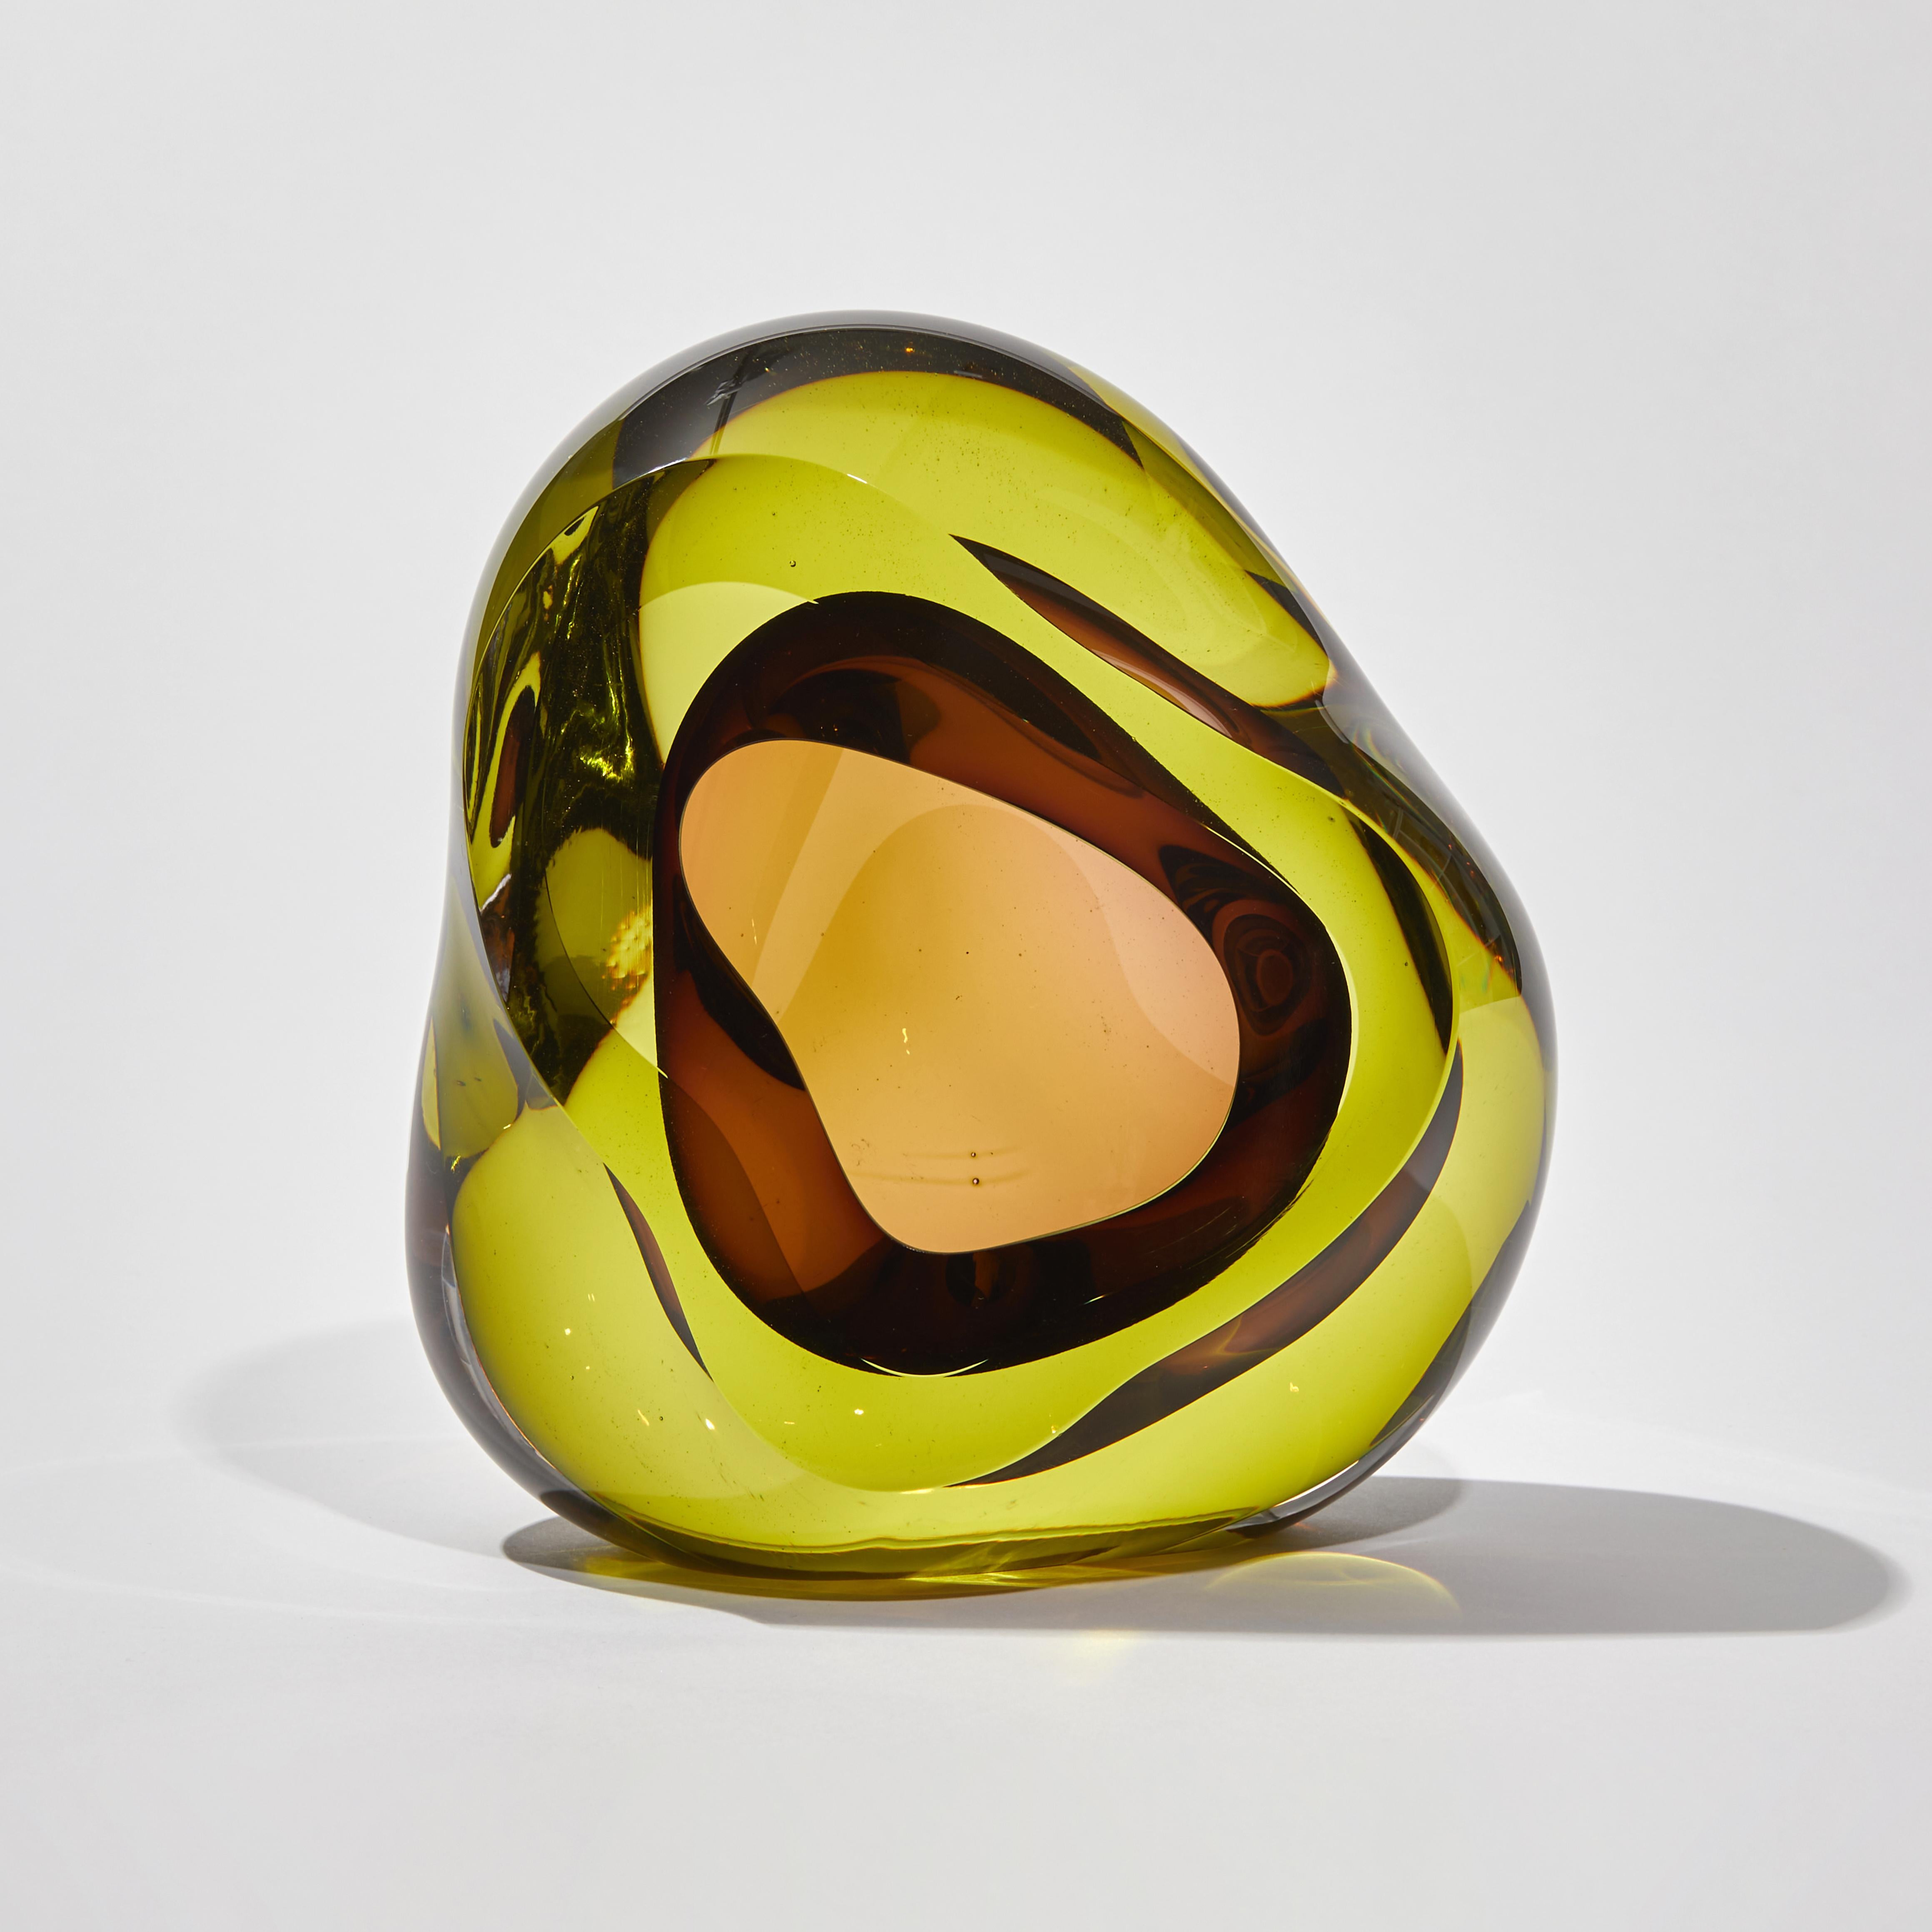 Vug in Lime & Purple is a unique hand blown sculpture by the British artist Samantha Donaldson. Created by layers of colored glass in bright lime and purple, the transparent colors merge and create further hues throughout the piece. An additional